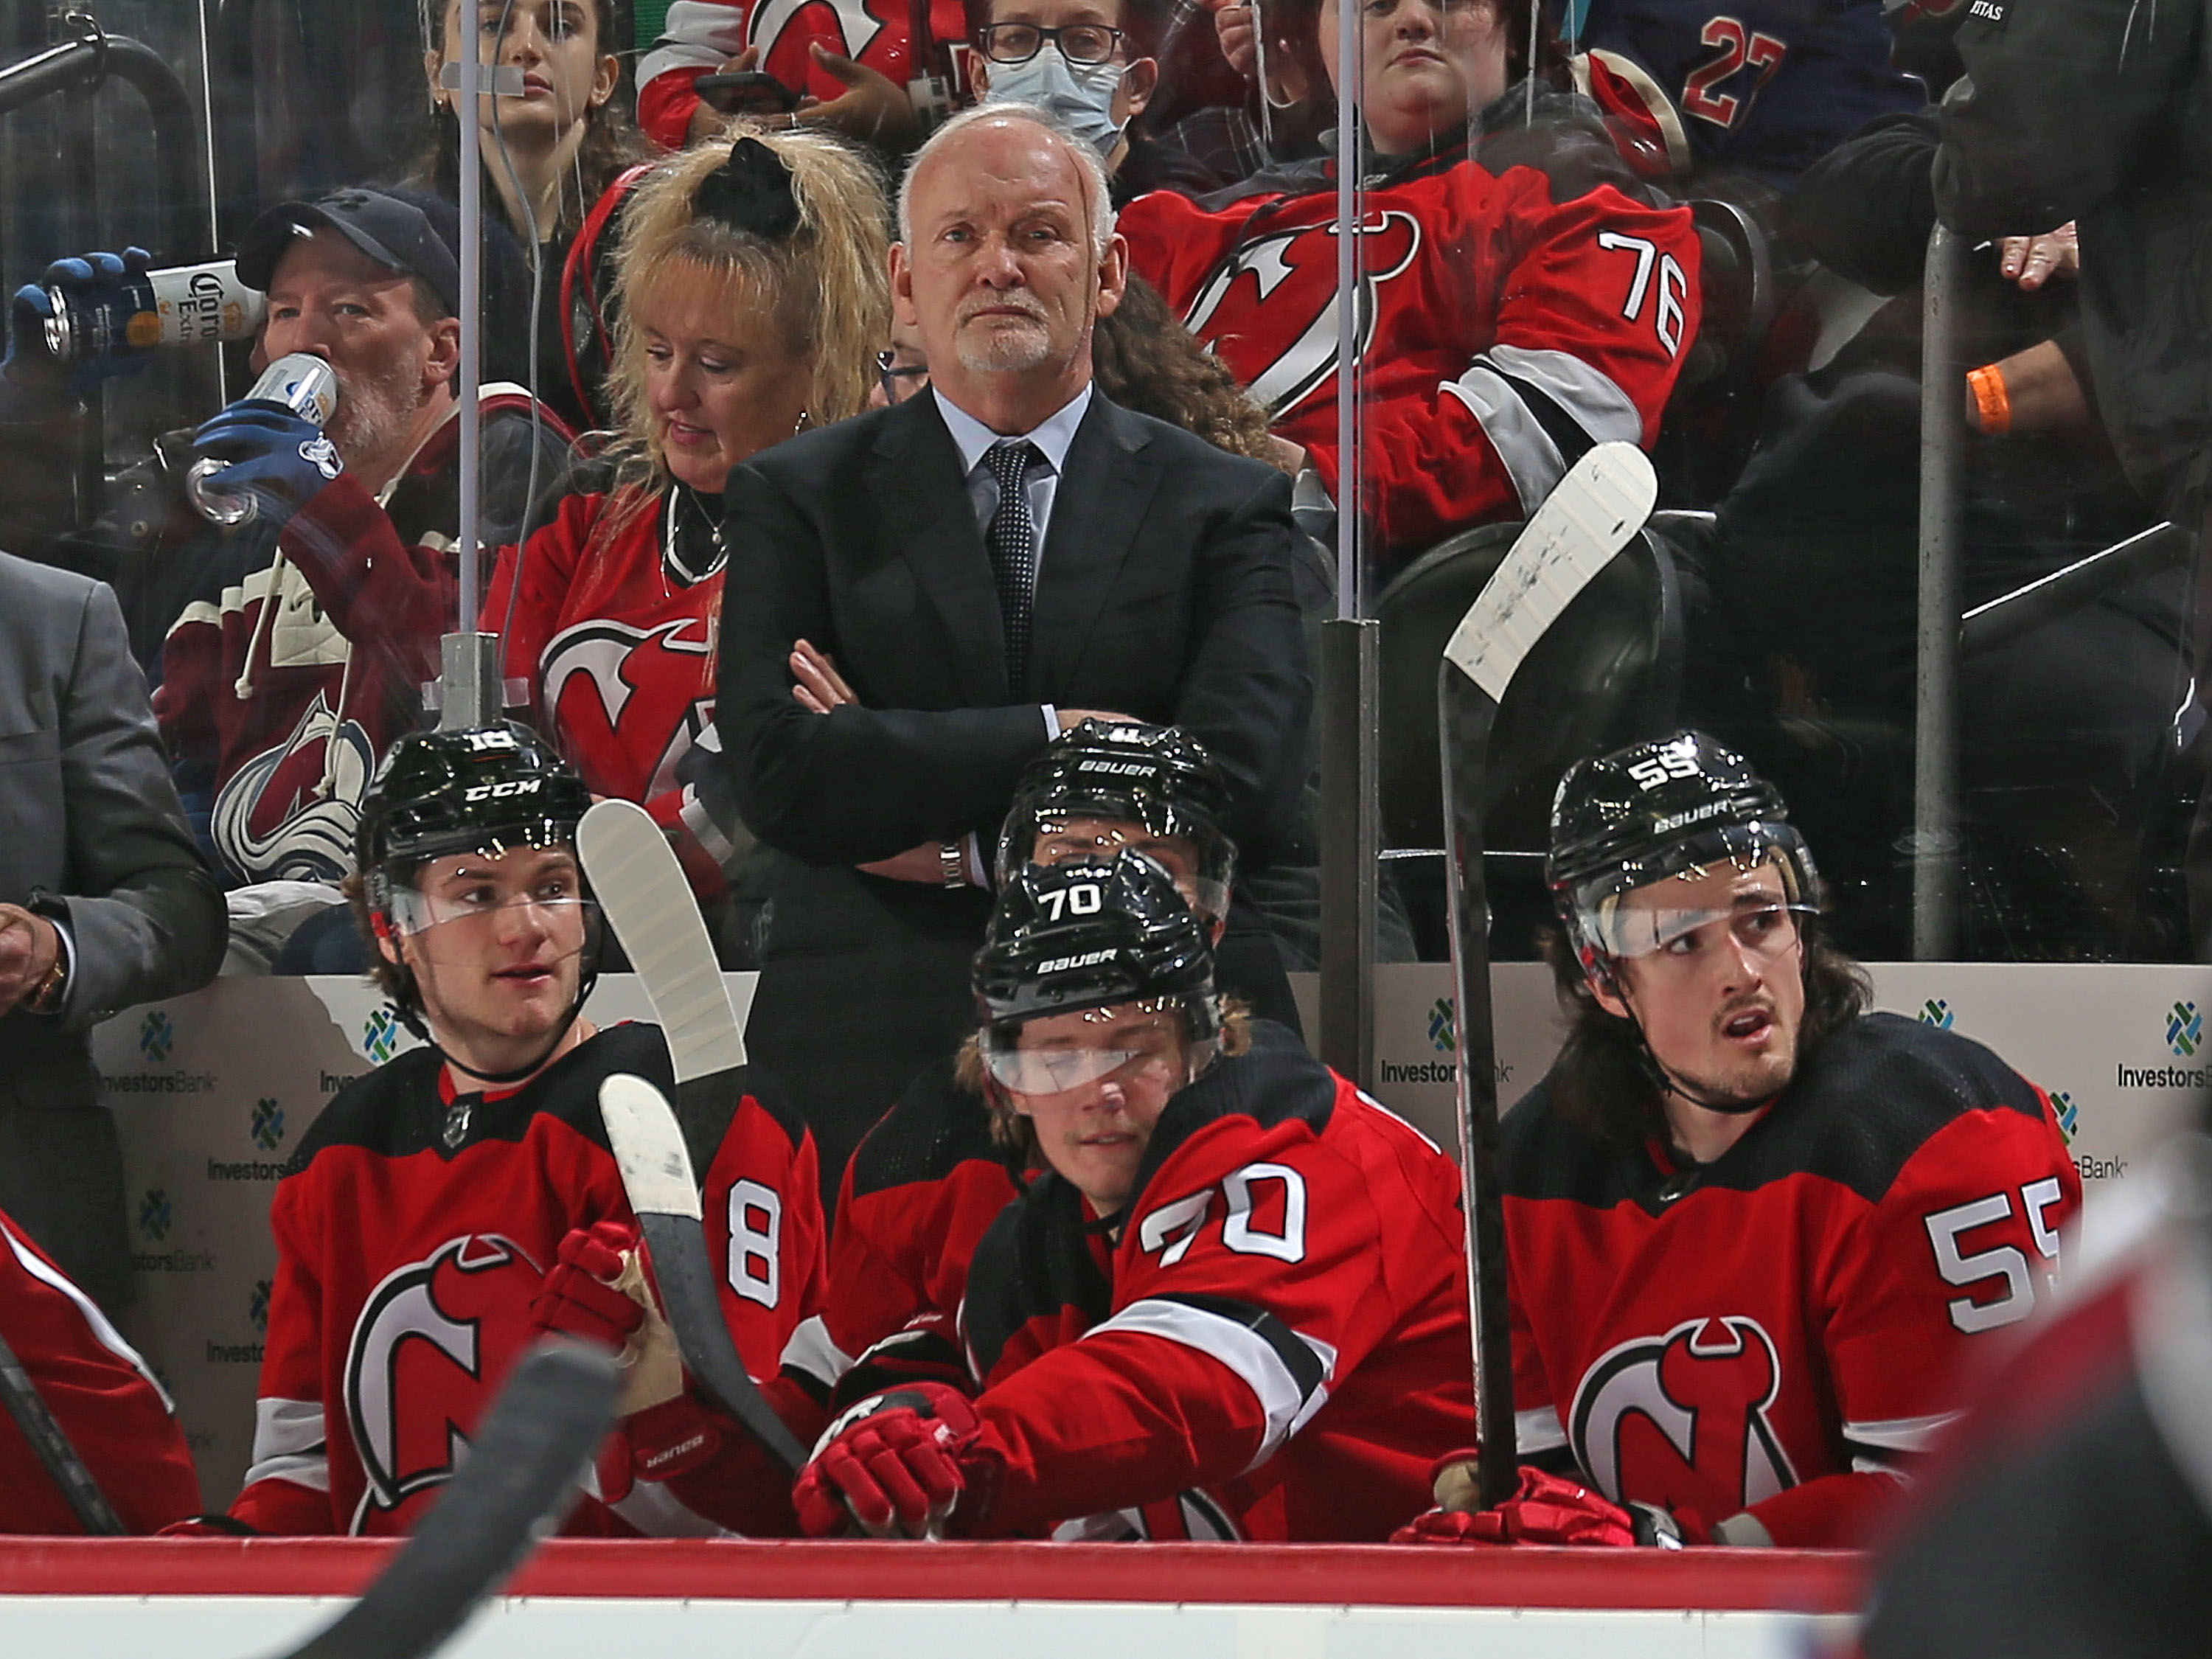 NEWARK, NJ - MARCH 08: Lindy Ruff of the New Jersey Devils looks on during the second period against the Colorado Avalanche at the Prudential Center on March 8, 2022 in Newark, New Jersey. (Photo by Andy Marlin/NHLI via Getty Images)